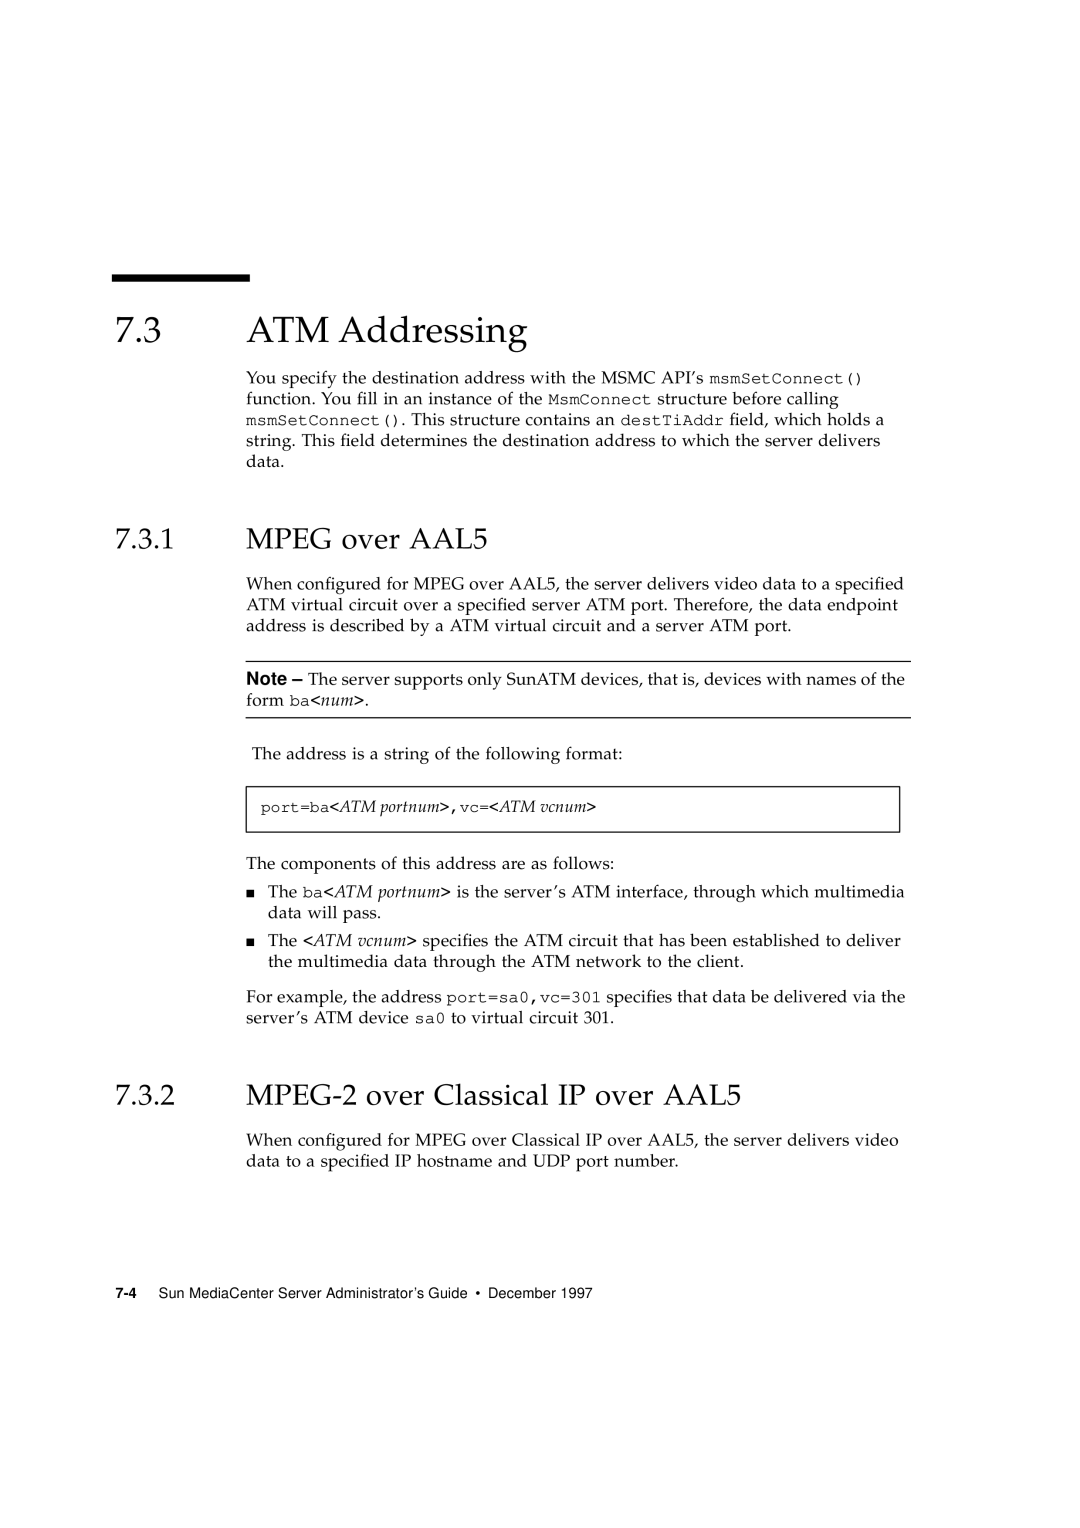 Sun Microsystems 2.1 manual ATM Addressing, MPEG over AAL5, MPEG-2 over Classical IP over AAL5 